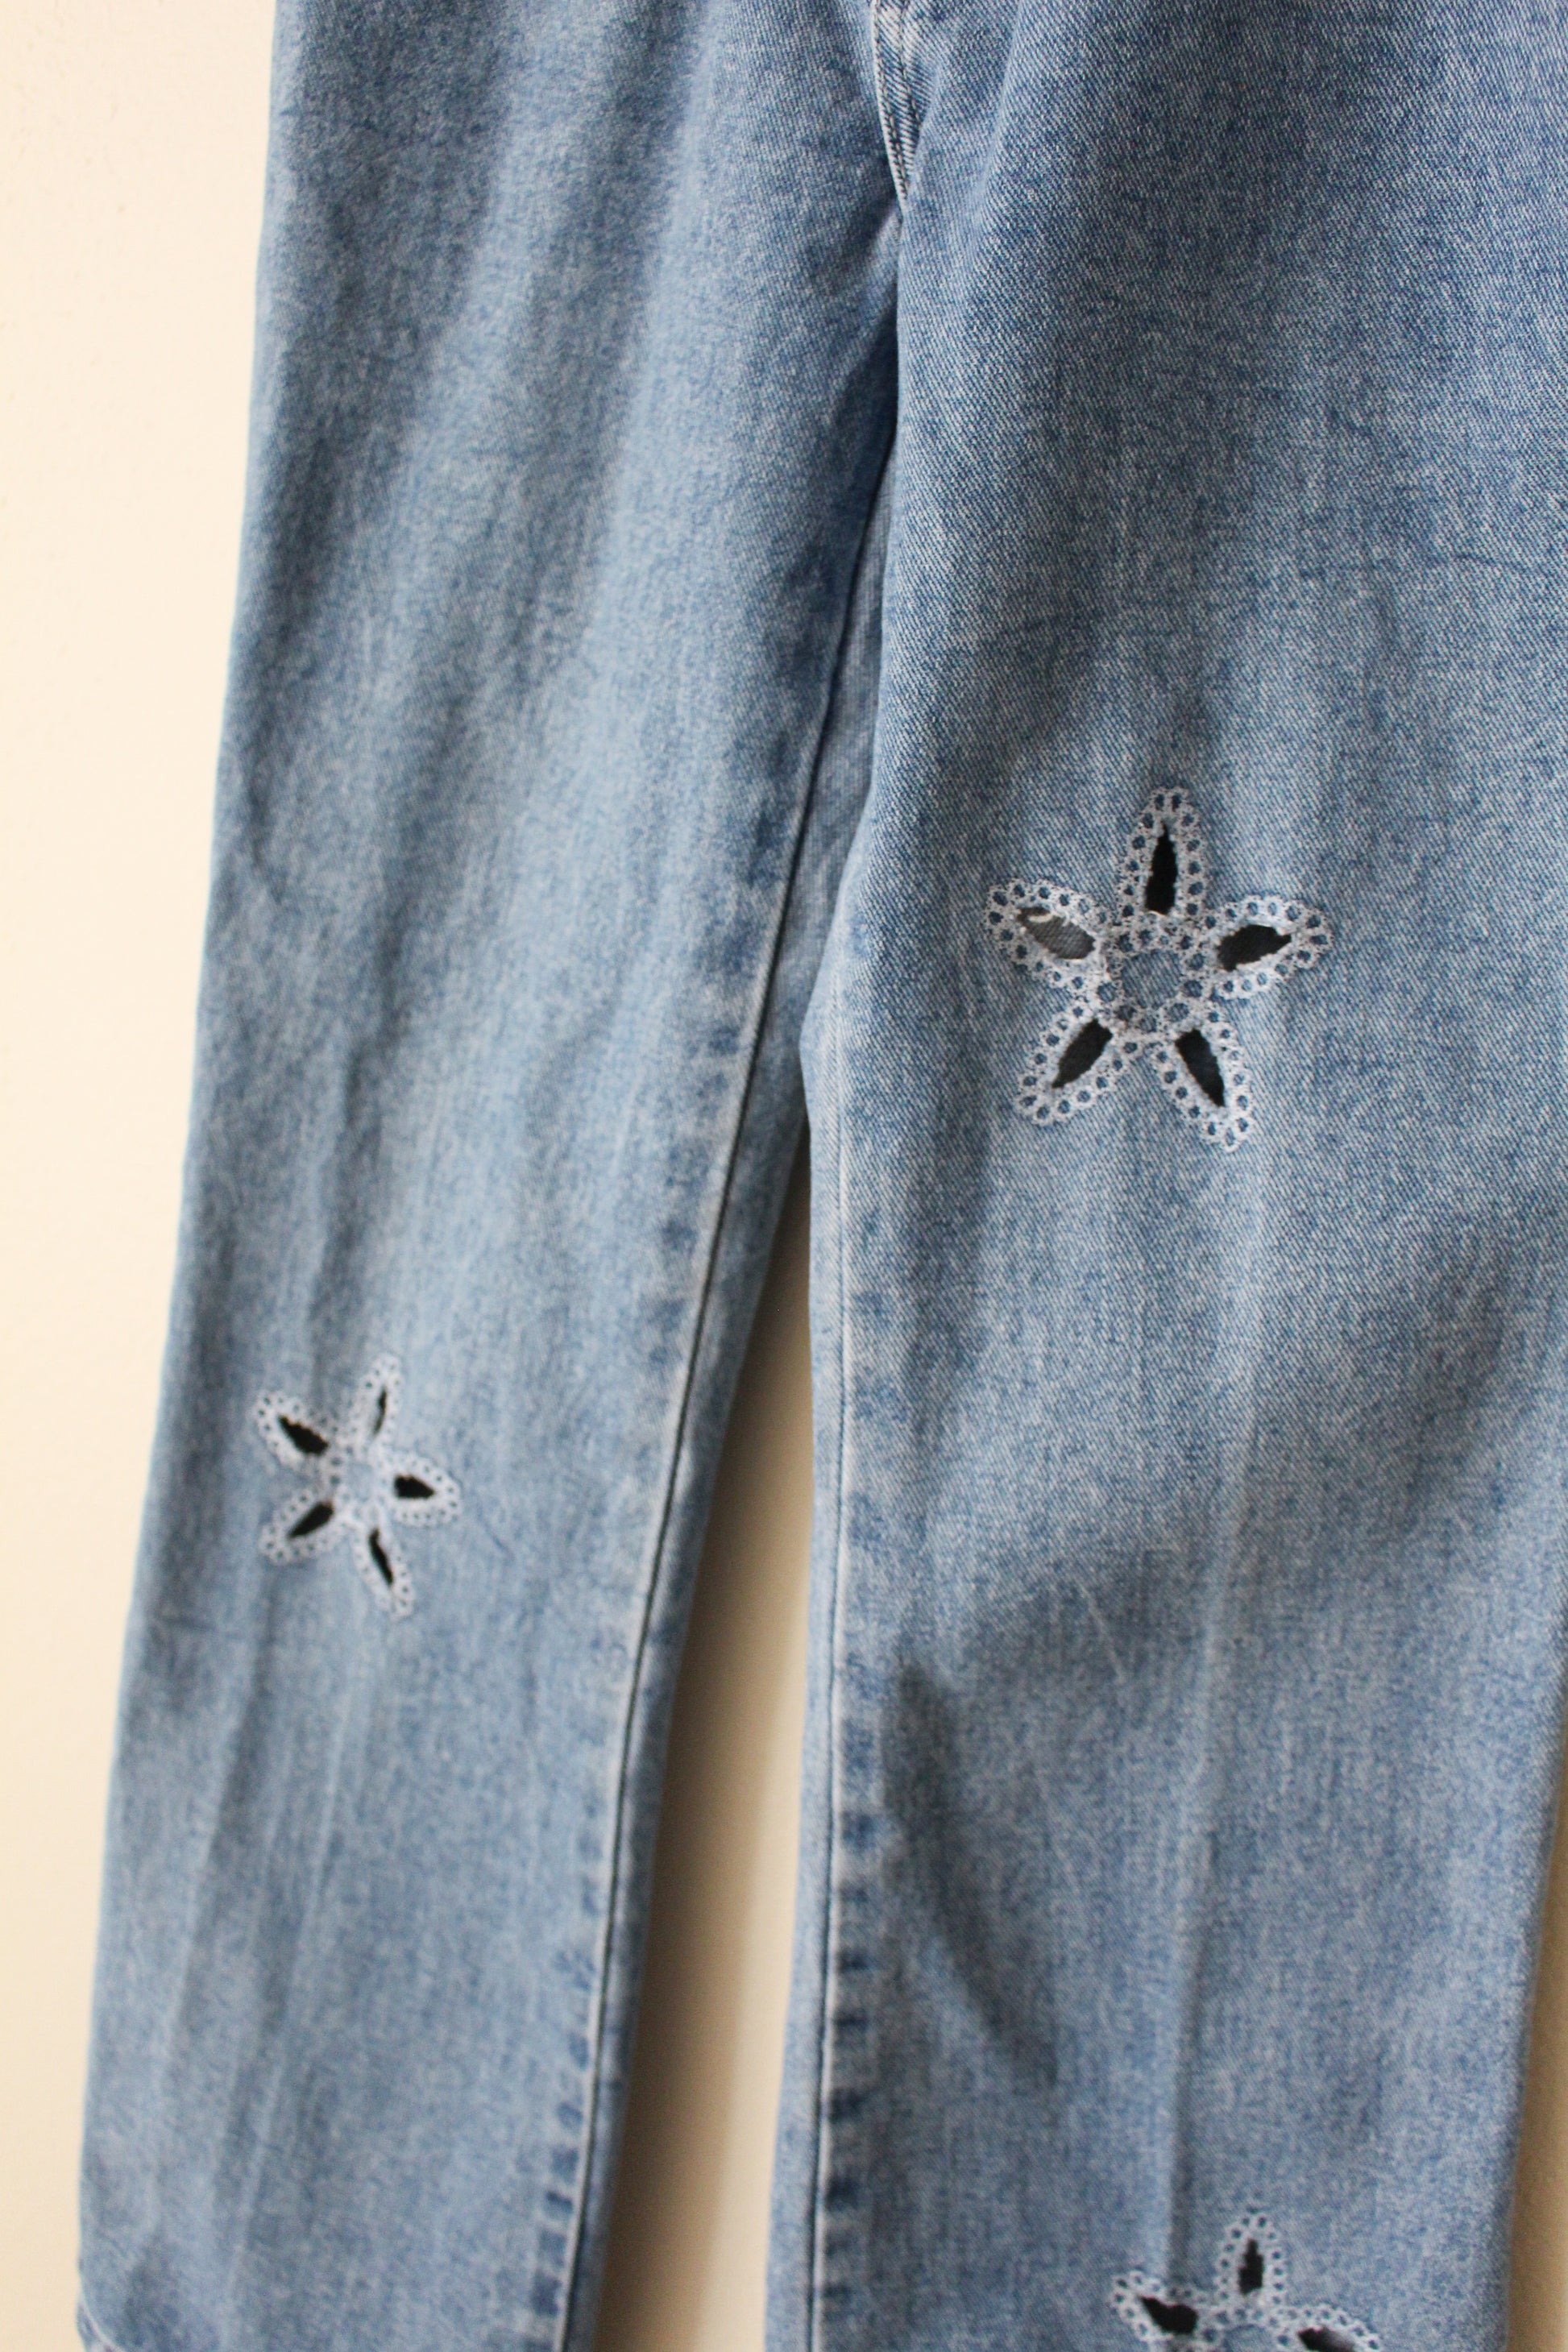 embroidered floral cut out in jeans 